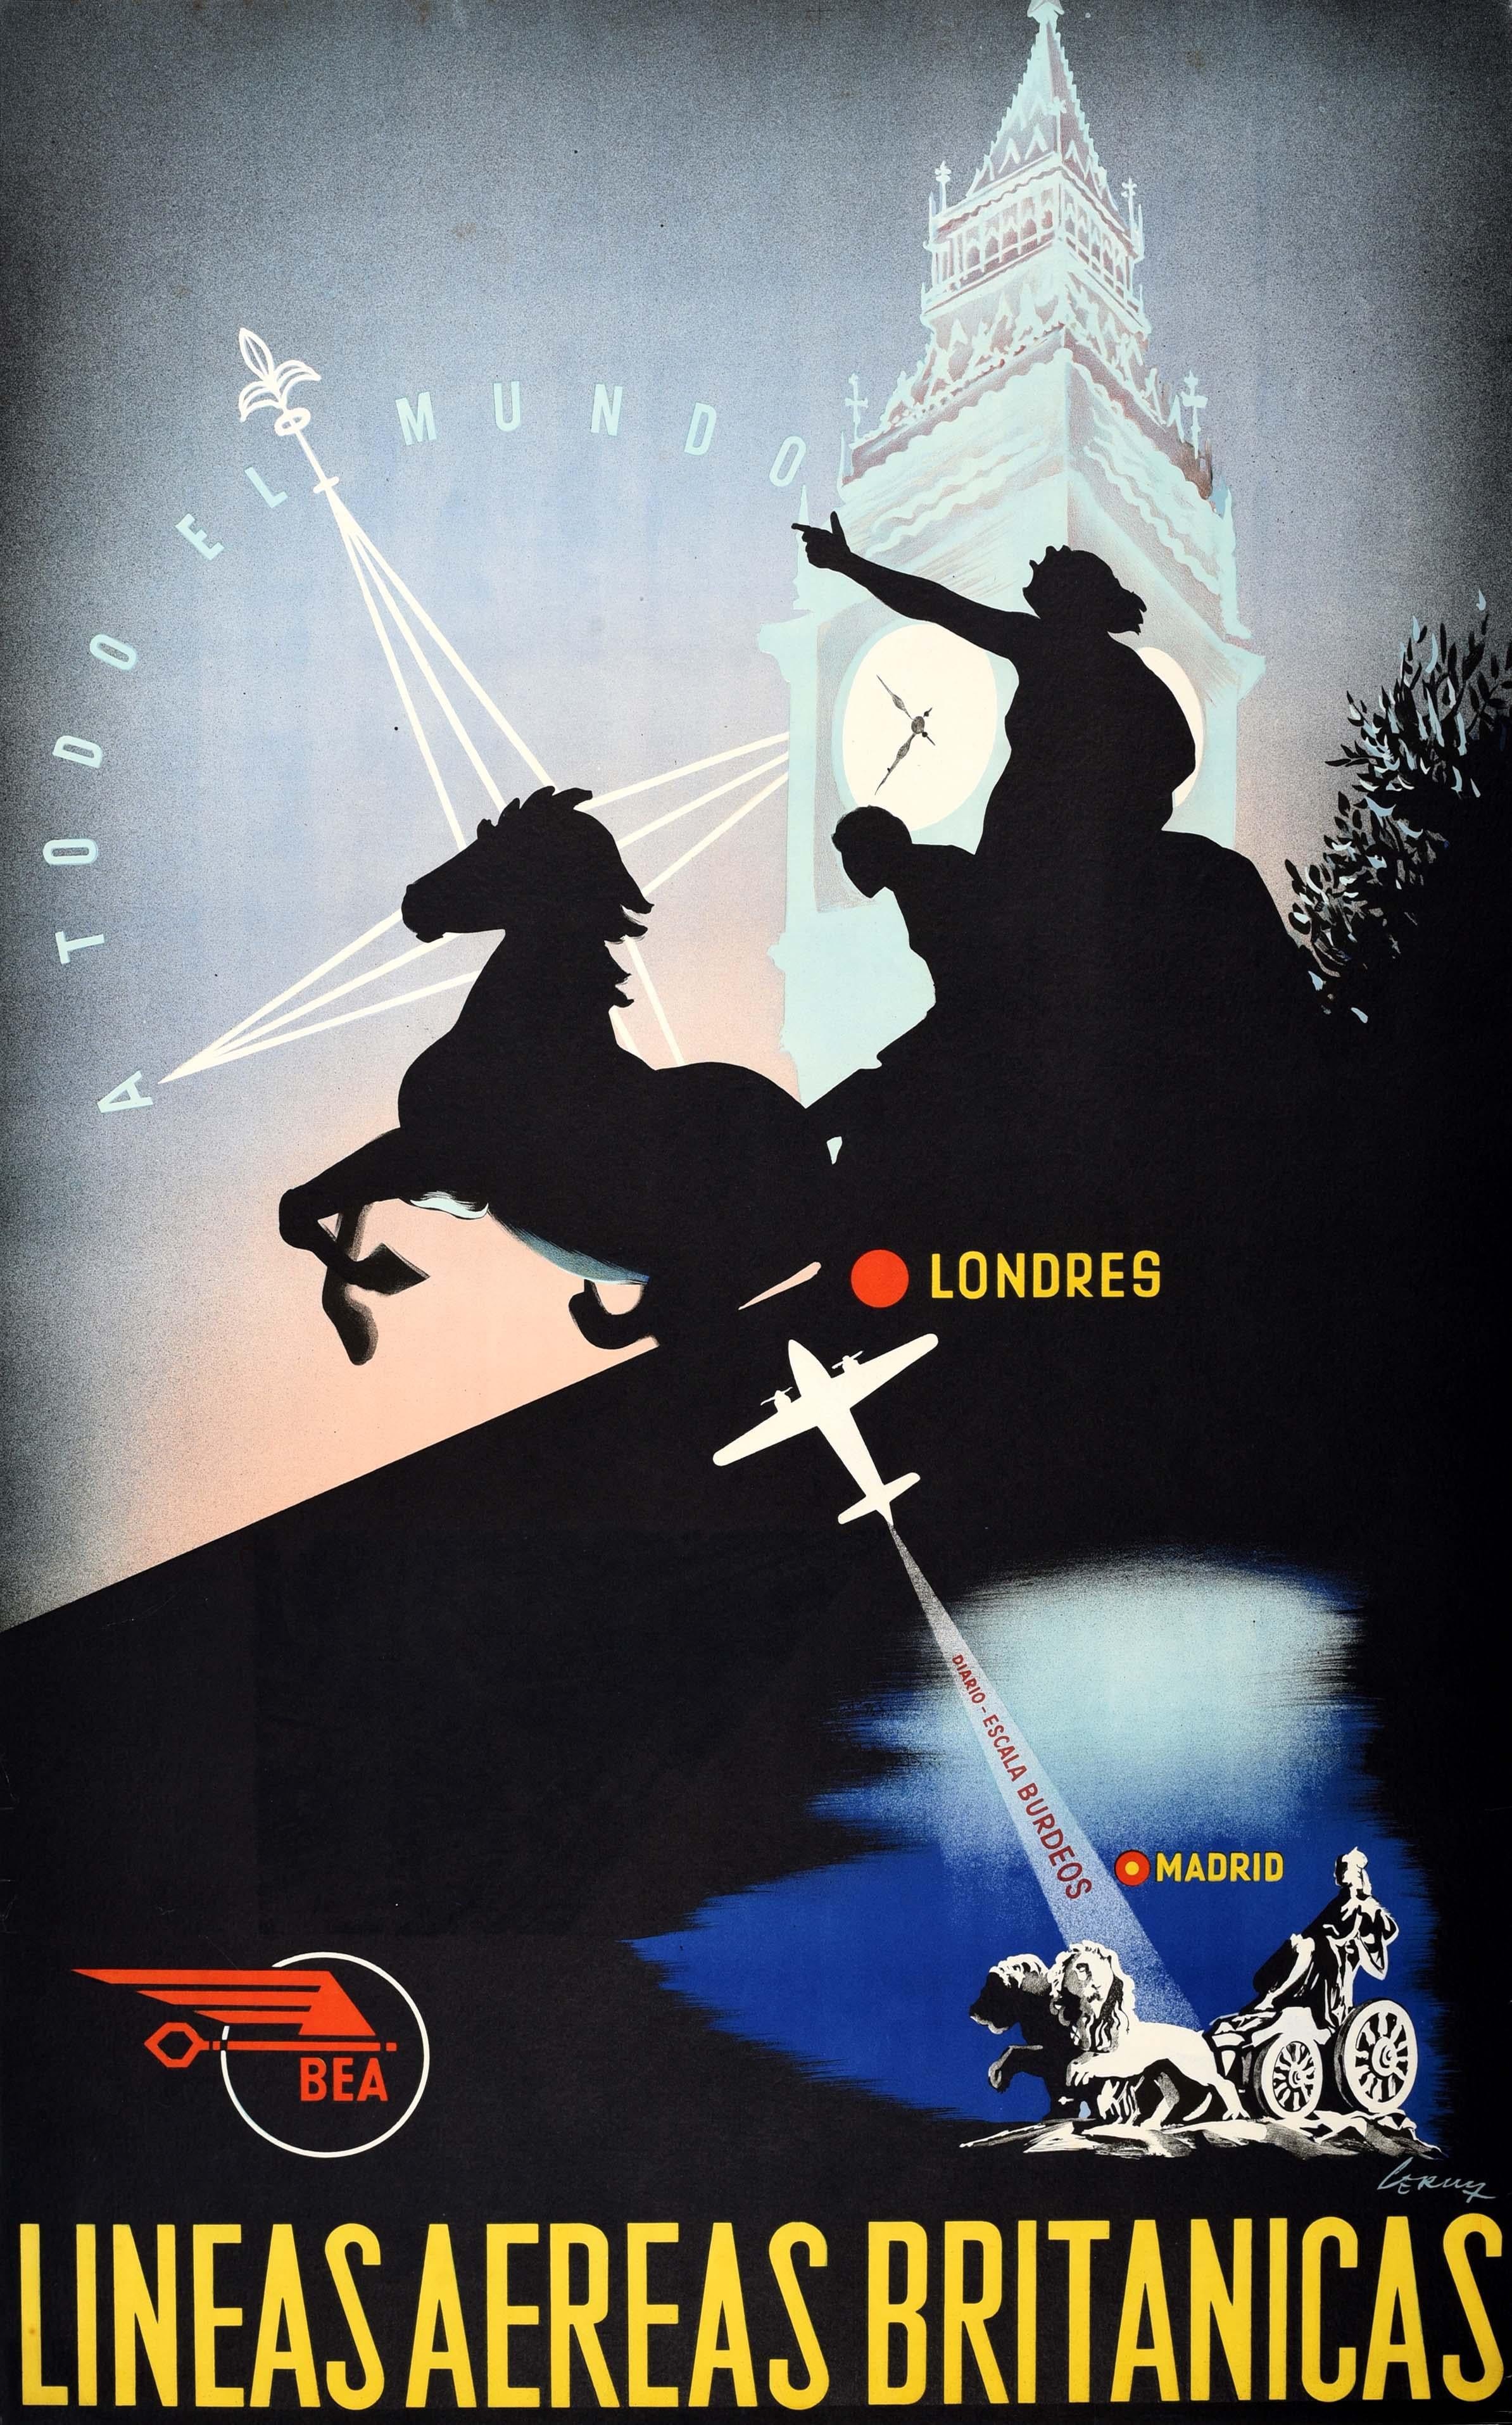 Leruy Print - Original Vintage Airline Travel Poster Madrid To London BEA To The Whole World